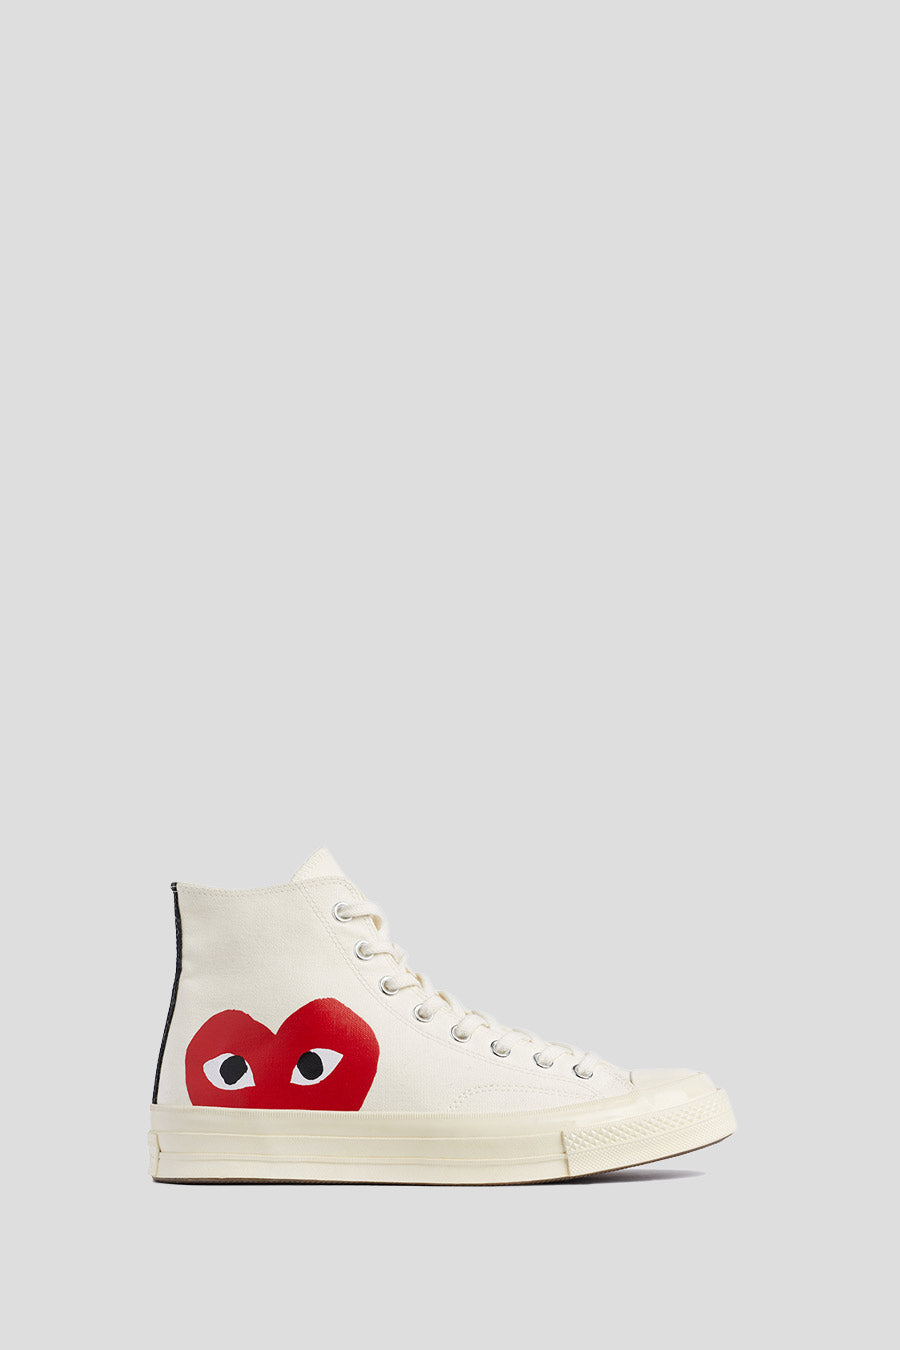 Comme des garçons PLAY - CONVERSE CT70 MILK, WHITE AND HIGH RISK RED SNEAKERS - LE LABO STORE